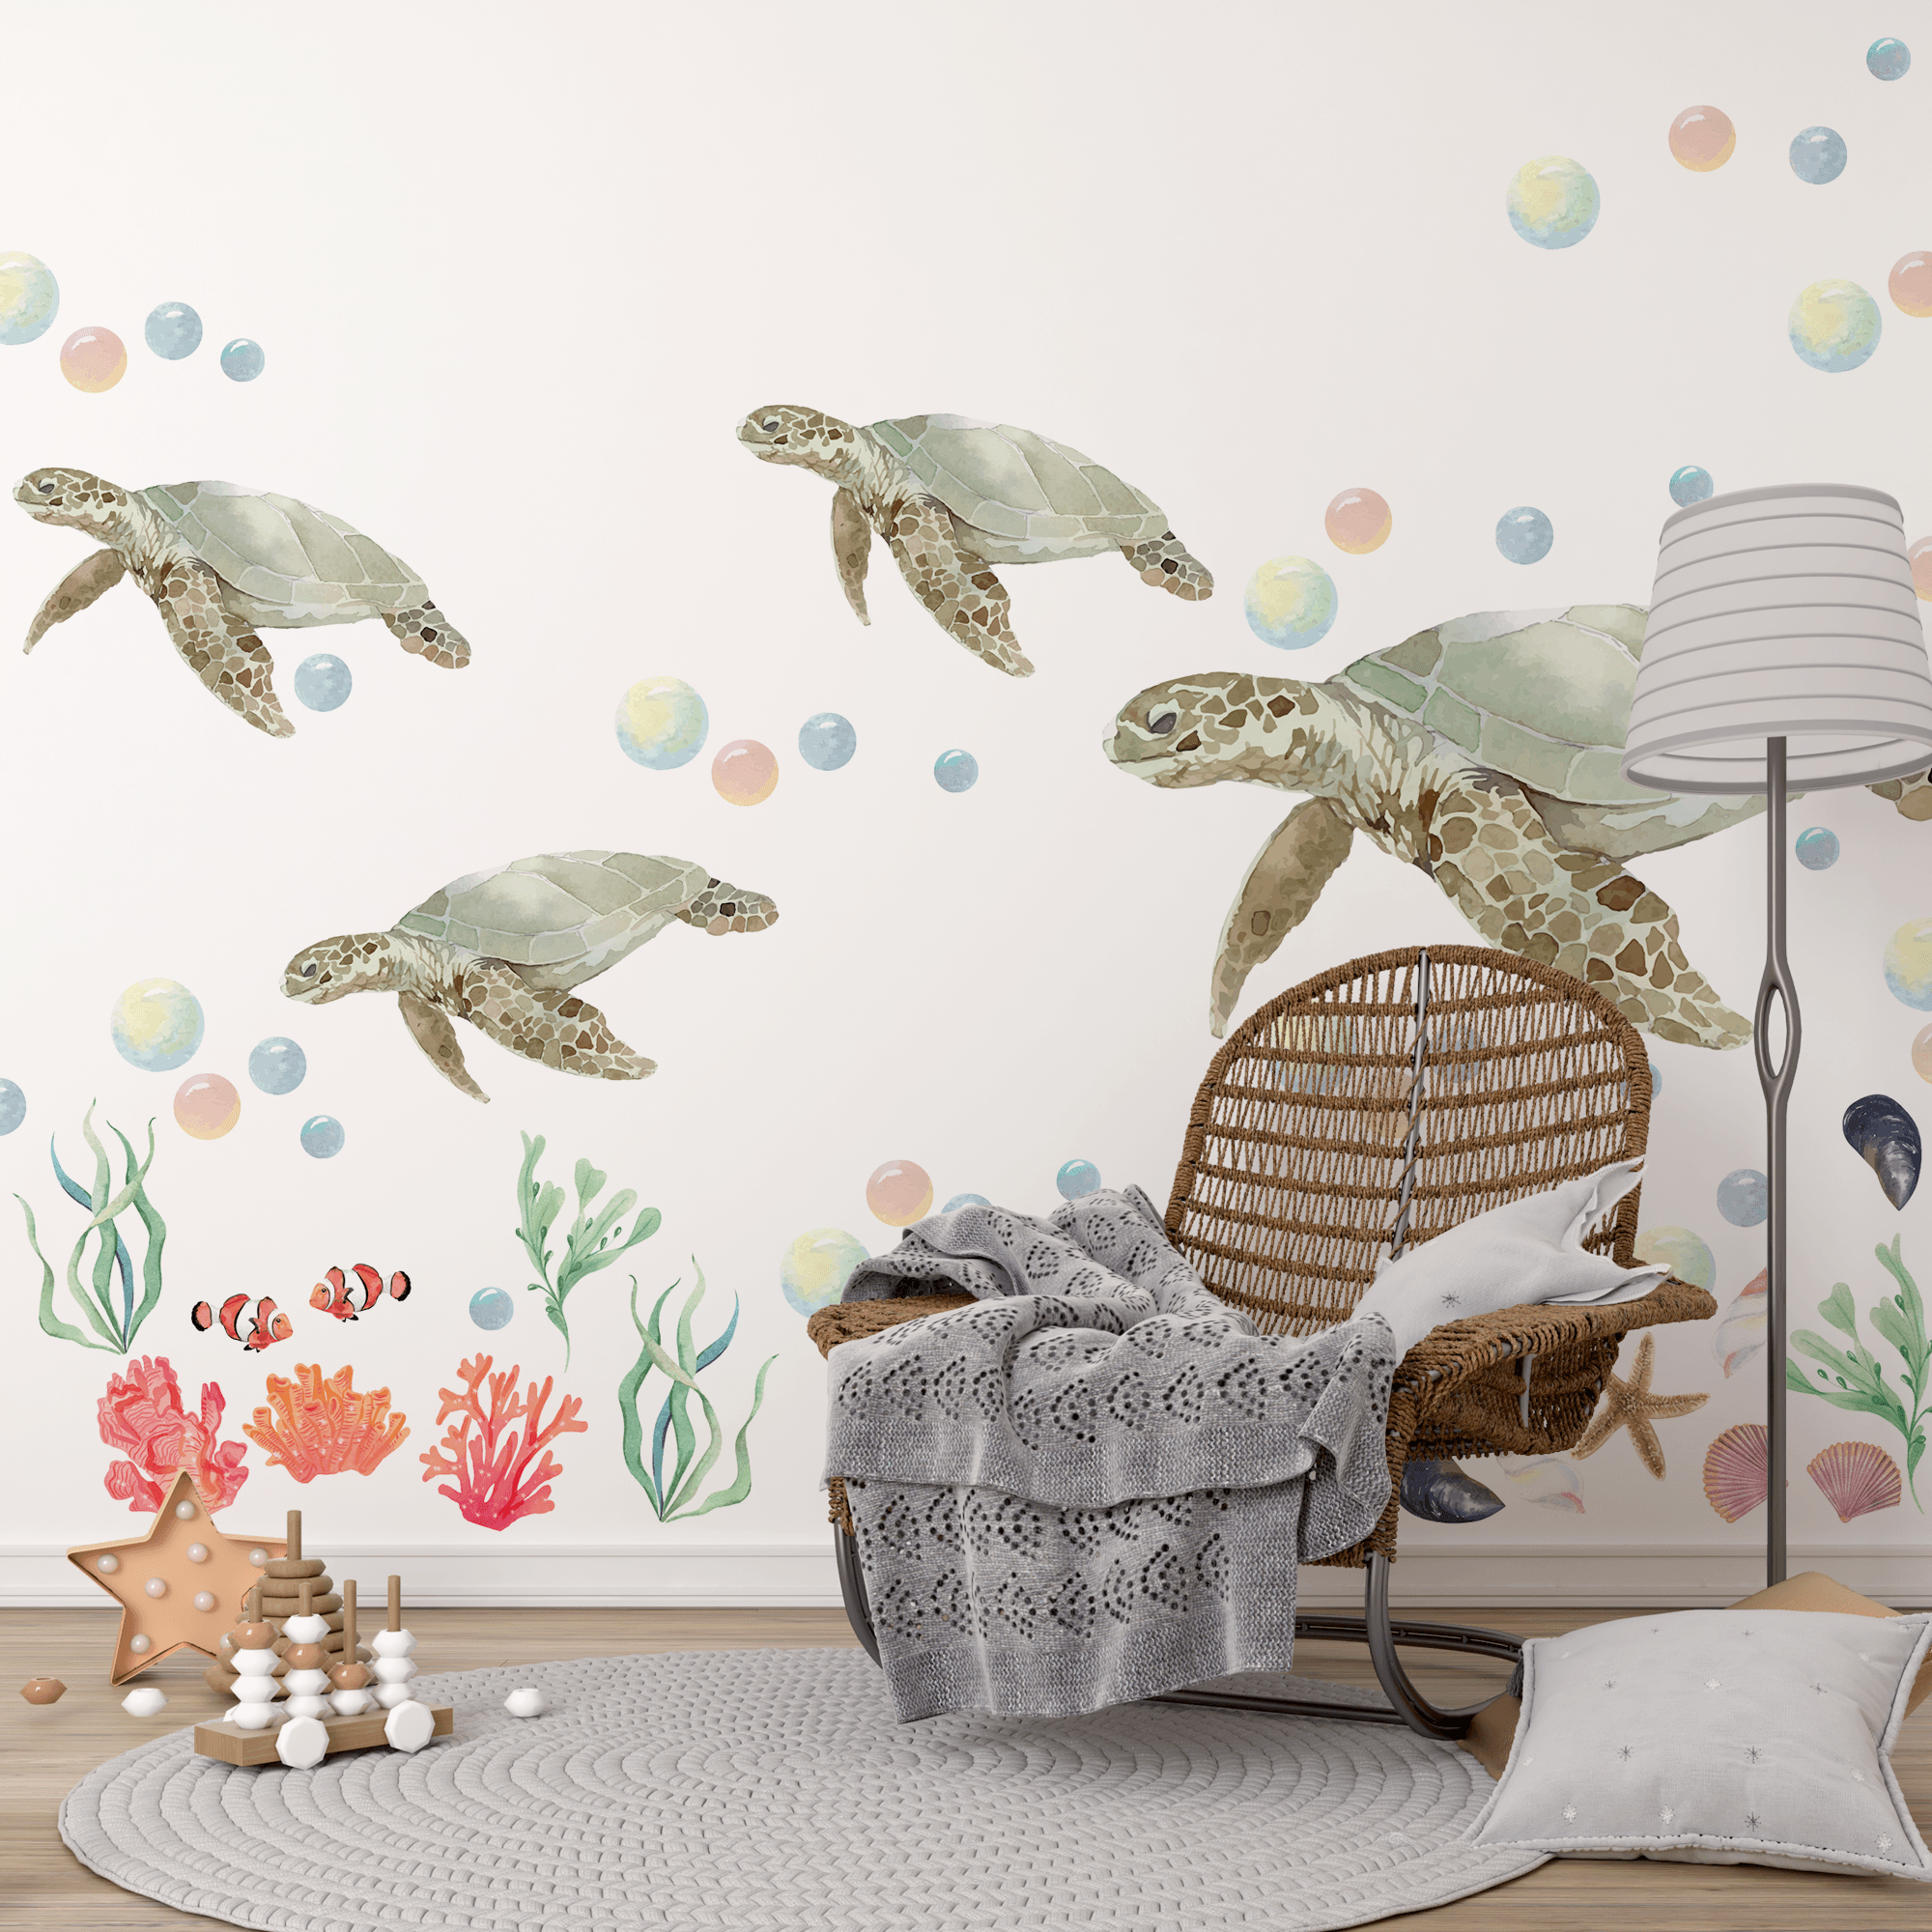 Turtle Watercolour Decals - Printibly